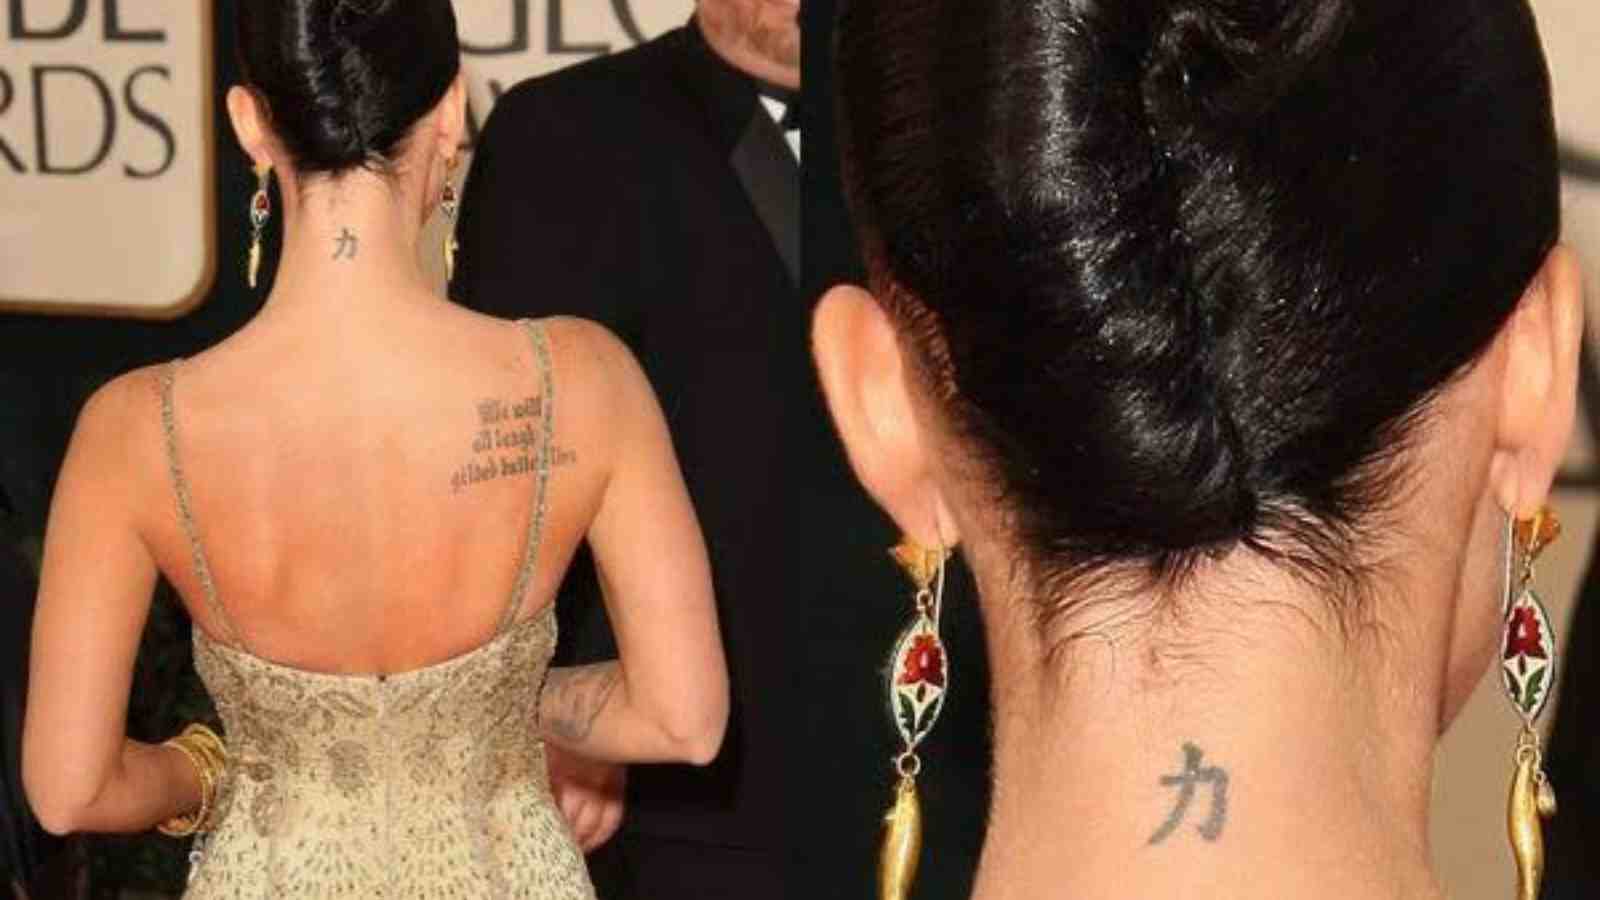 What does the tattoo on Megan Fox's neck means?